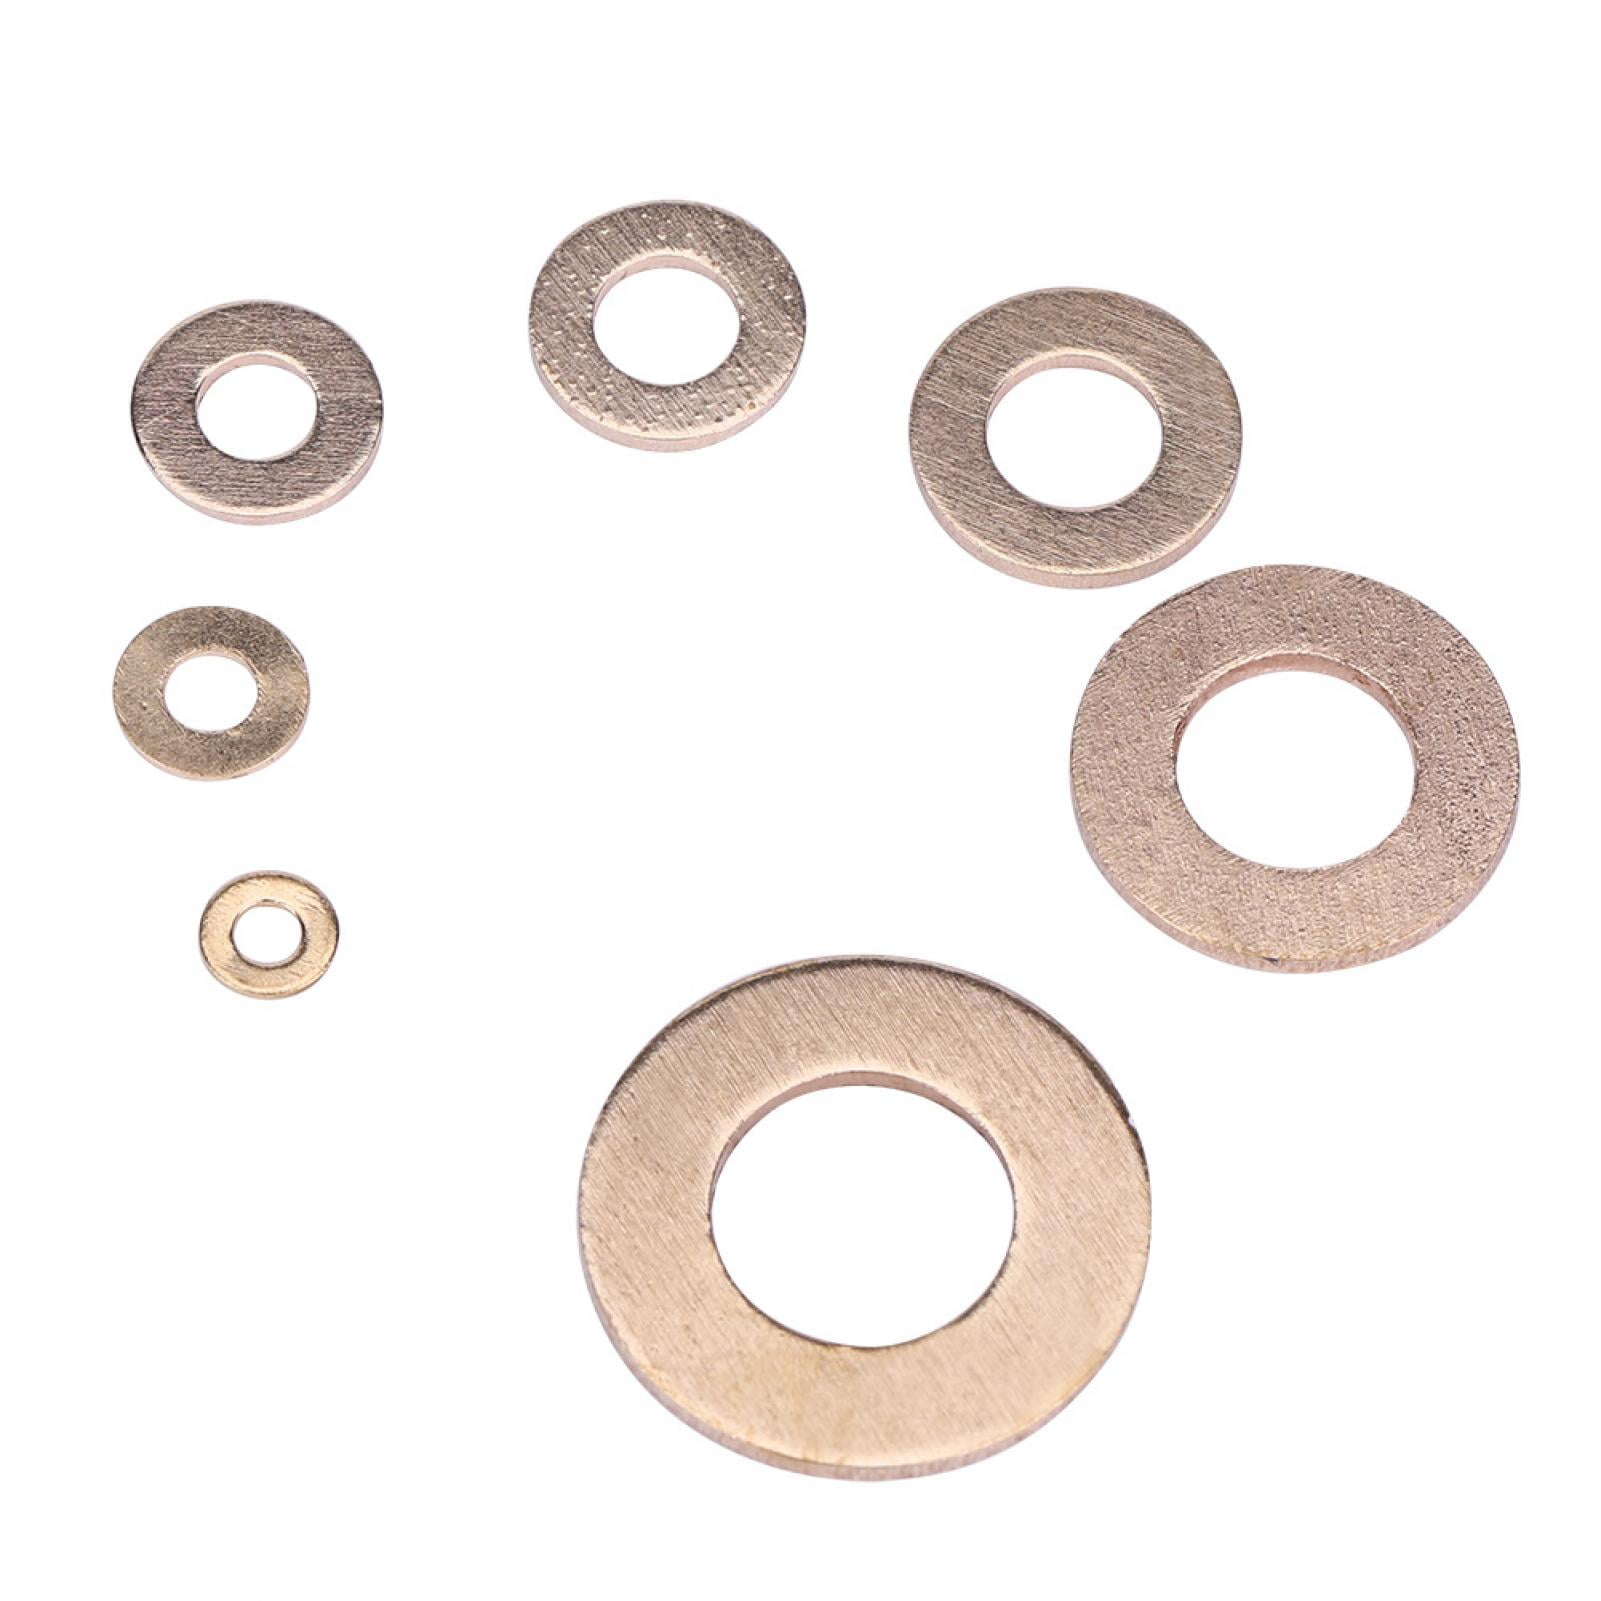 Details about   Flat Washers Flat Washer Small Flat Washers For Paper Fasteners For Brads 